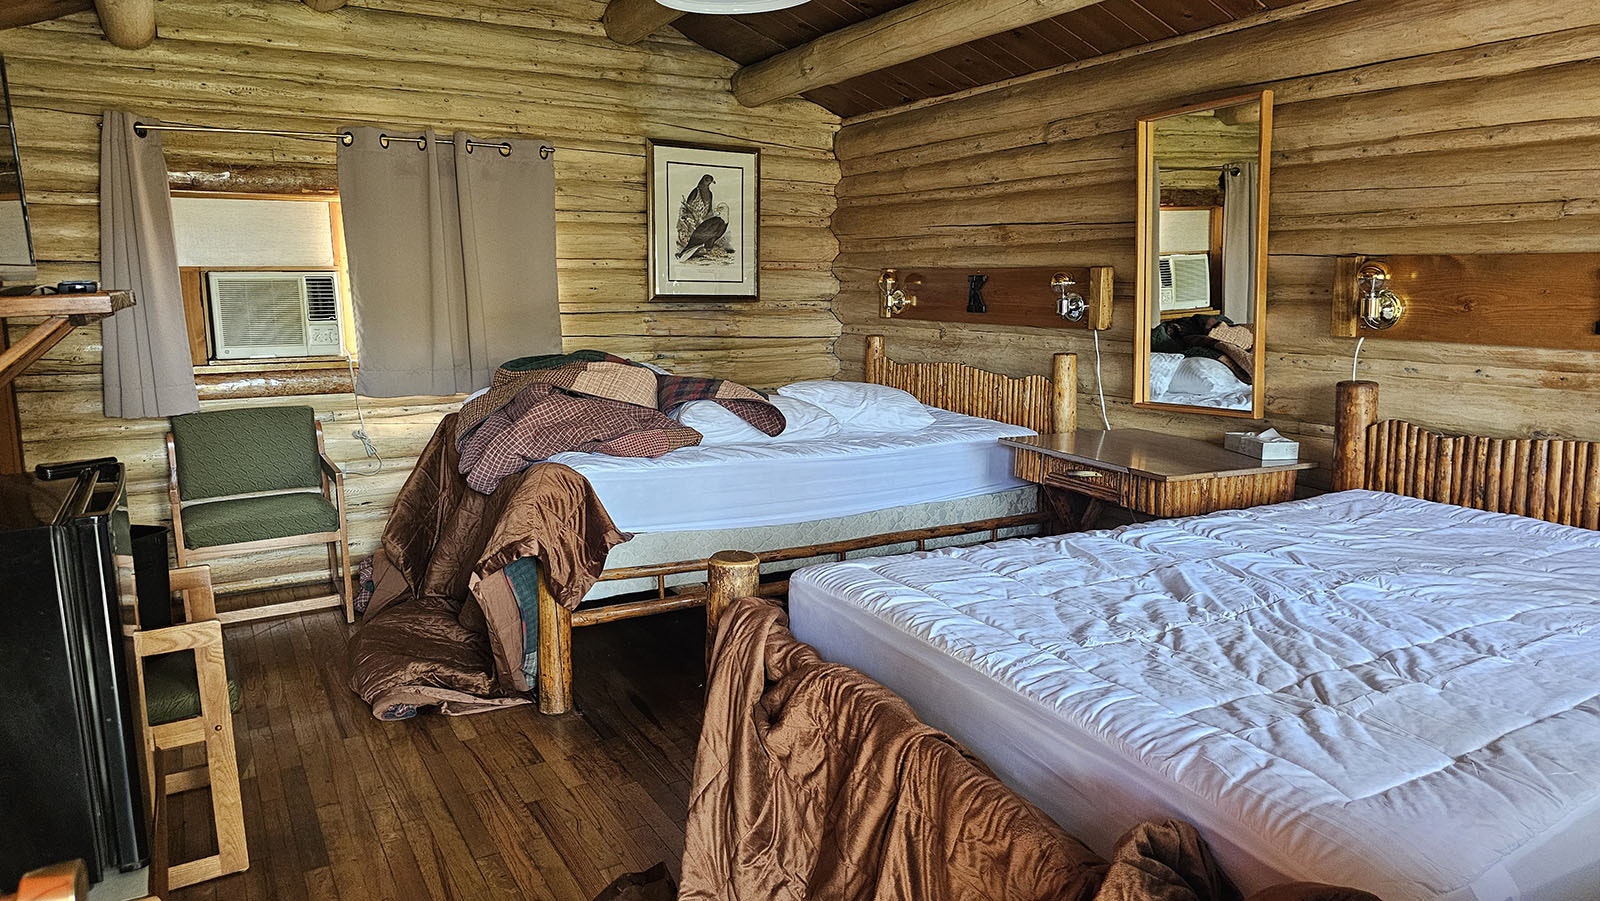 One of the double queen bed cabins.